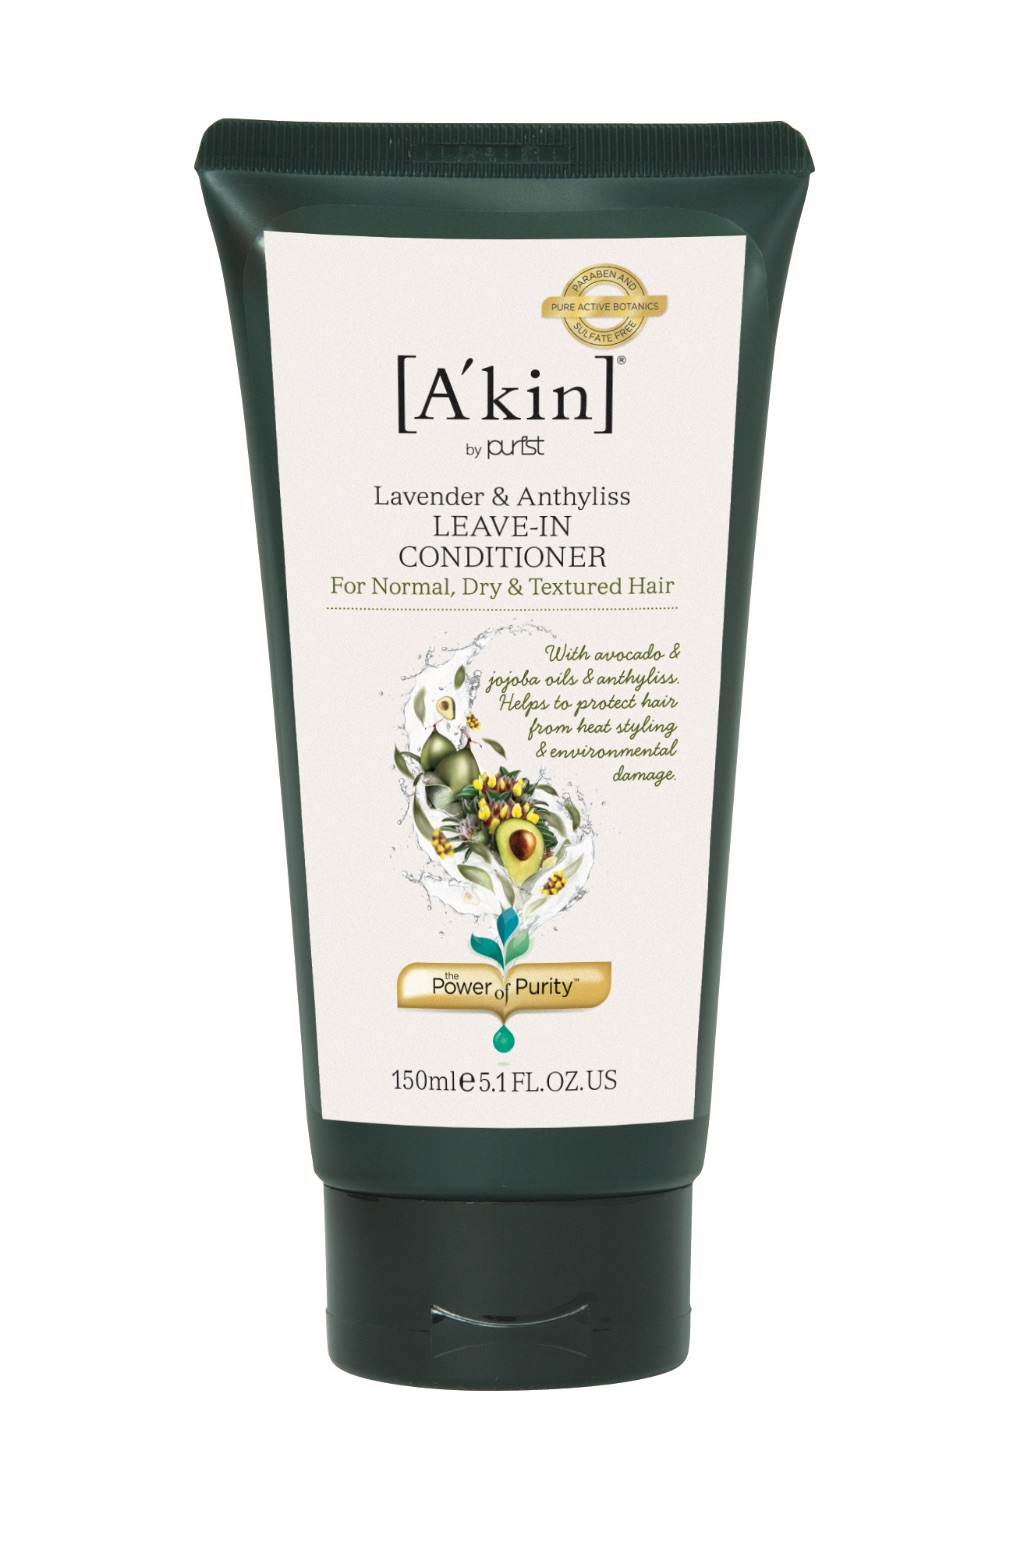 A'kin Lavender & Anthyllis Leave-In Conditioner 150ml